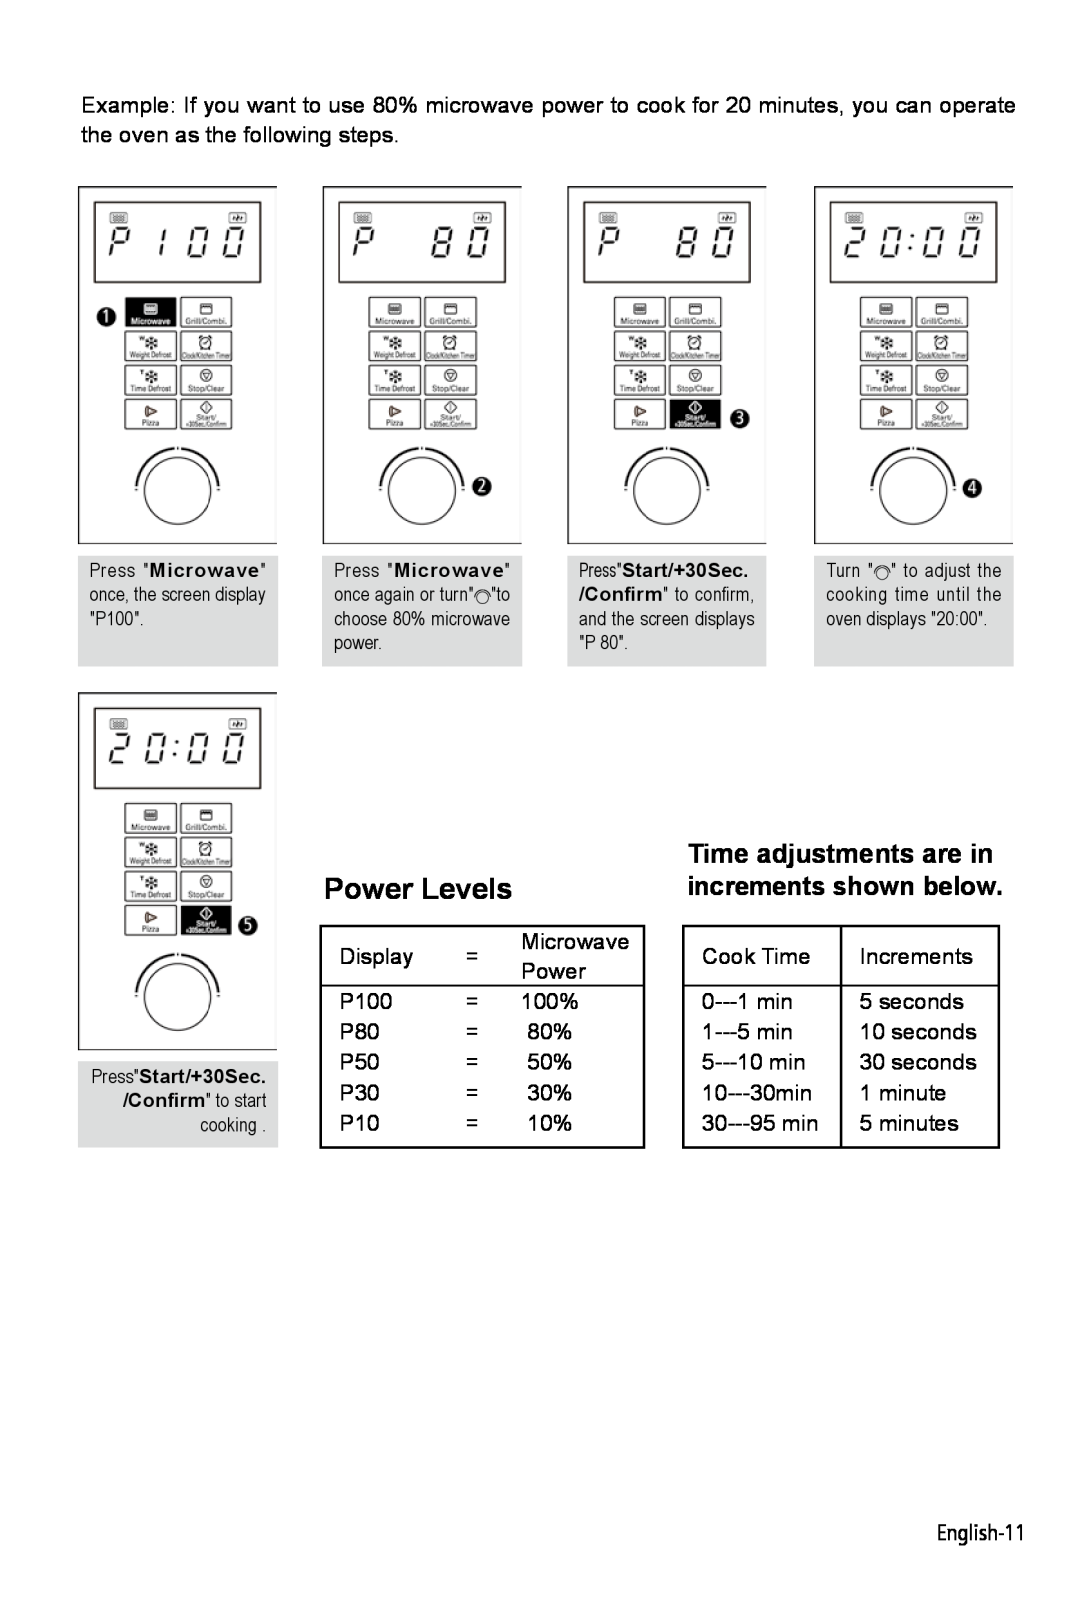 West Bend NJ 07054 instruction manual Power Levels, Time adjustments are in increments shown below 